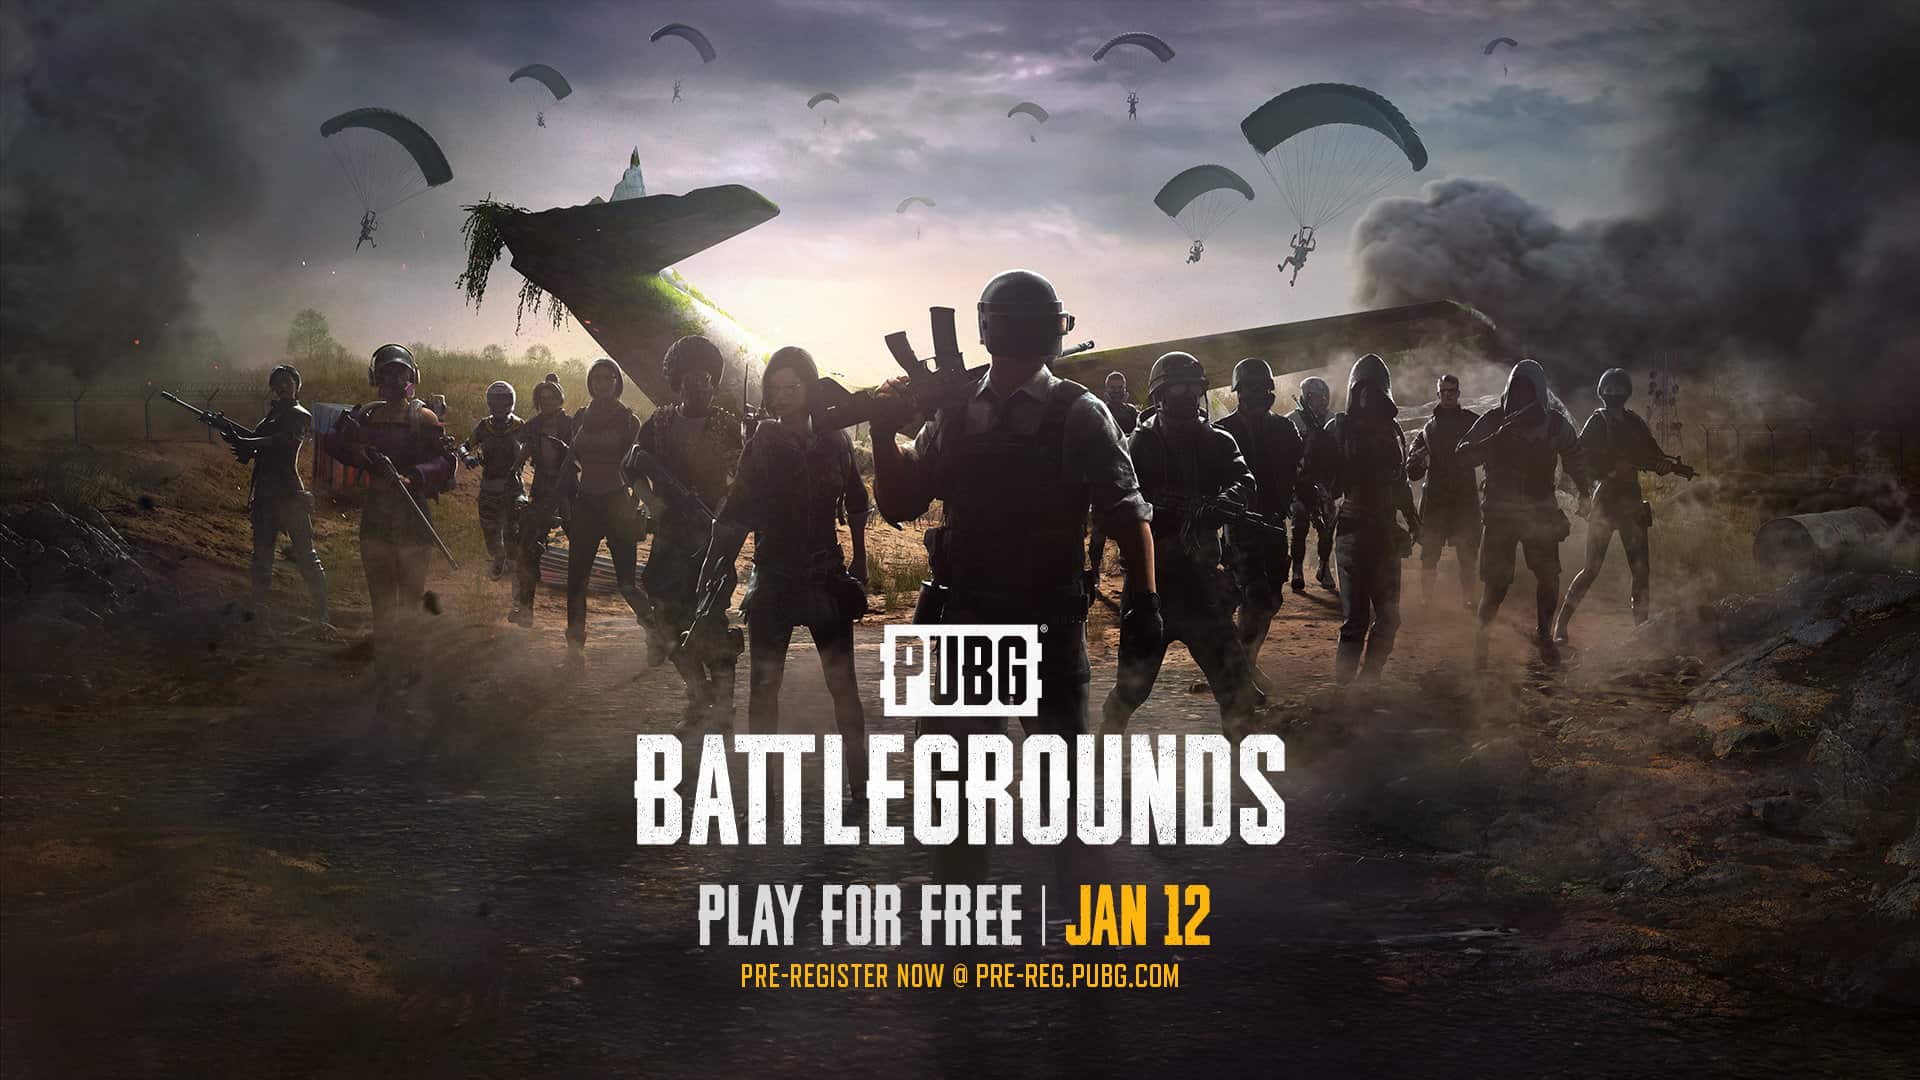 PUBG: Battlegrounds goes free-to-play from today